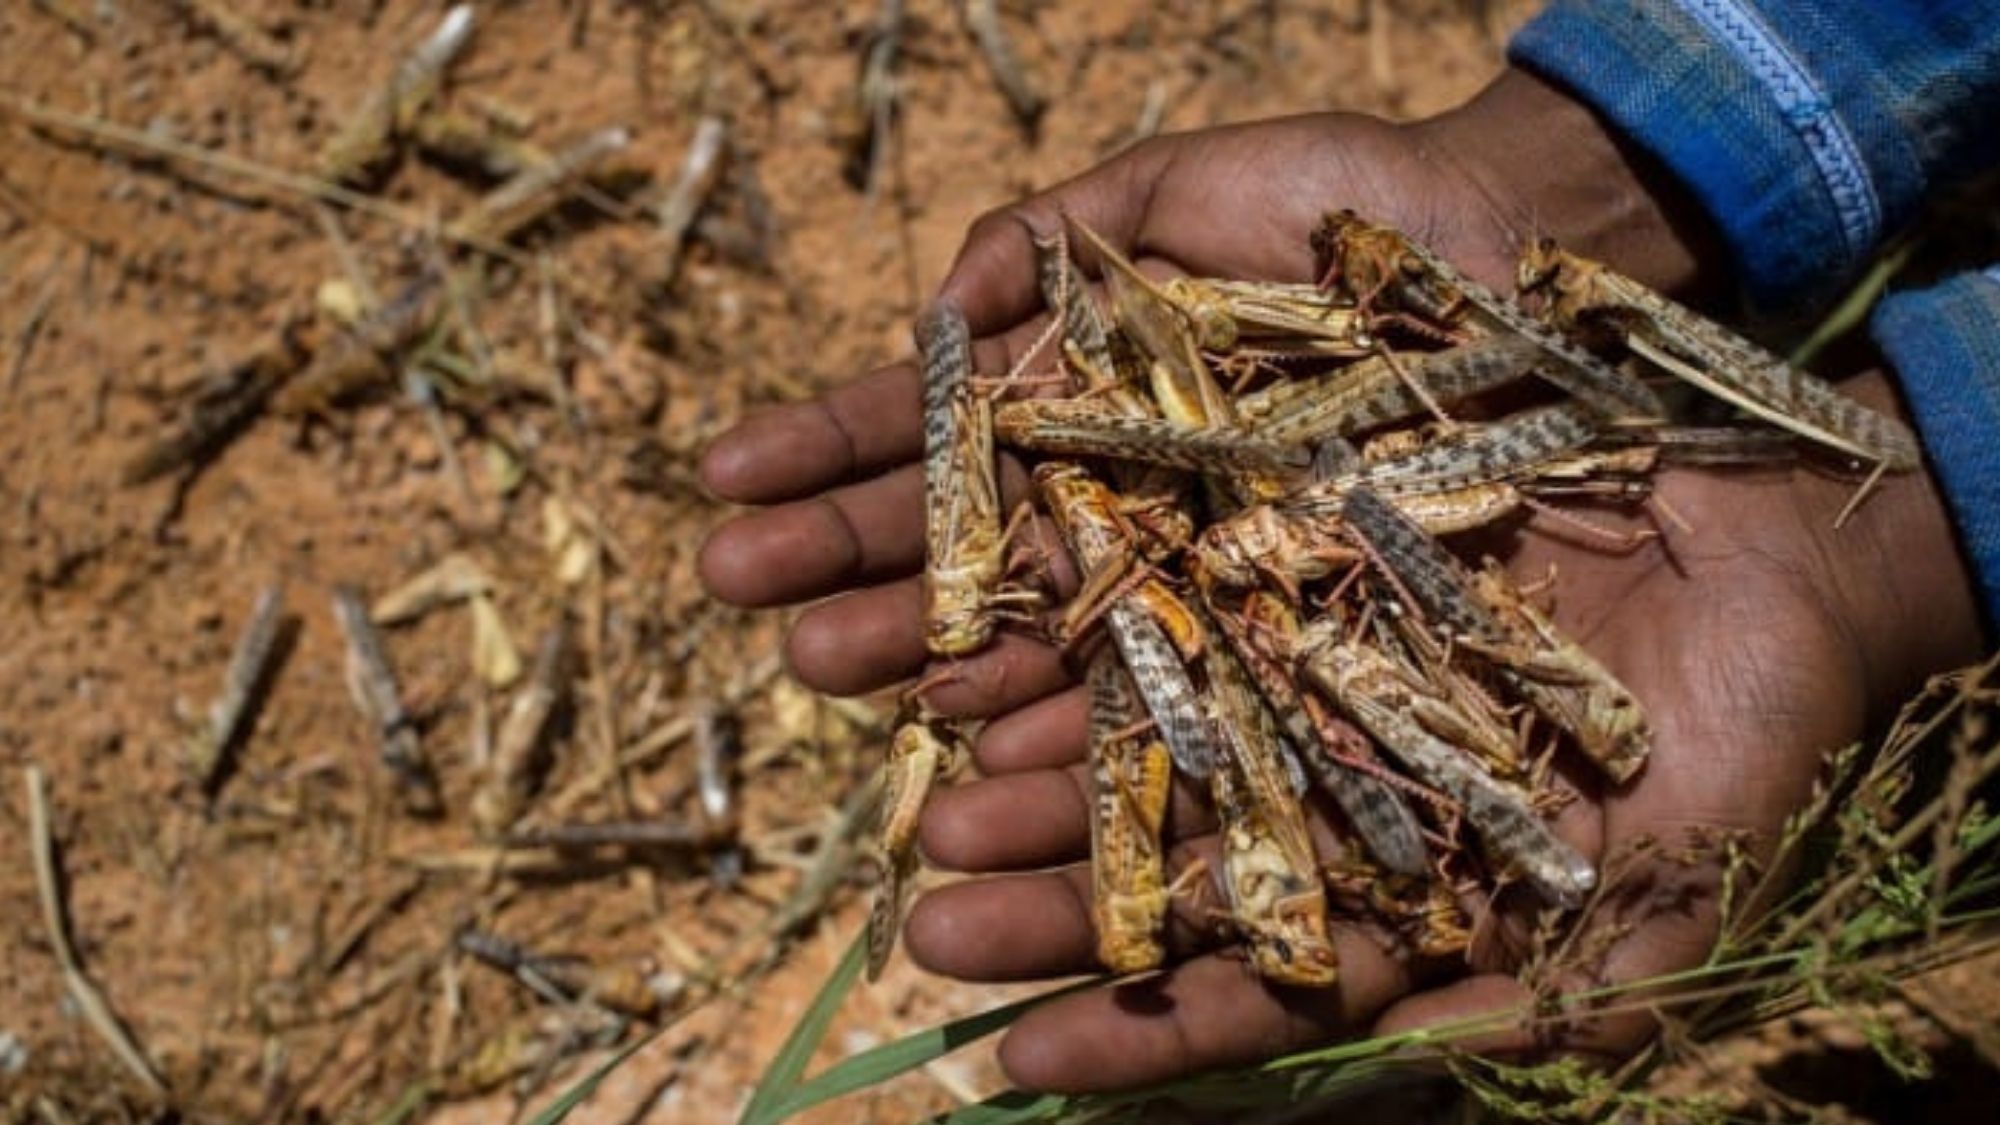 Western Cape Department of Agriculture made R5 million available to fight off a devastating locust plague